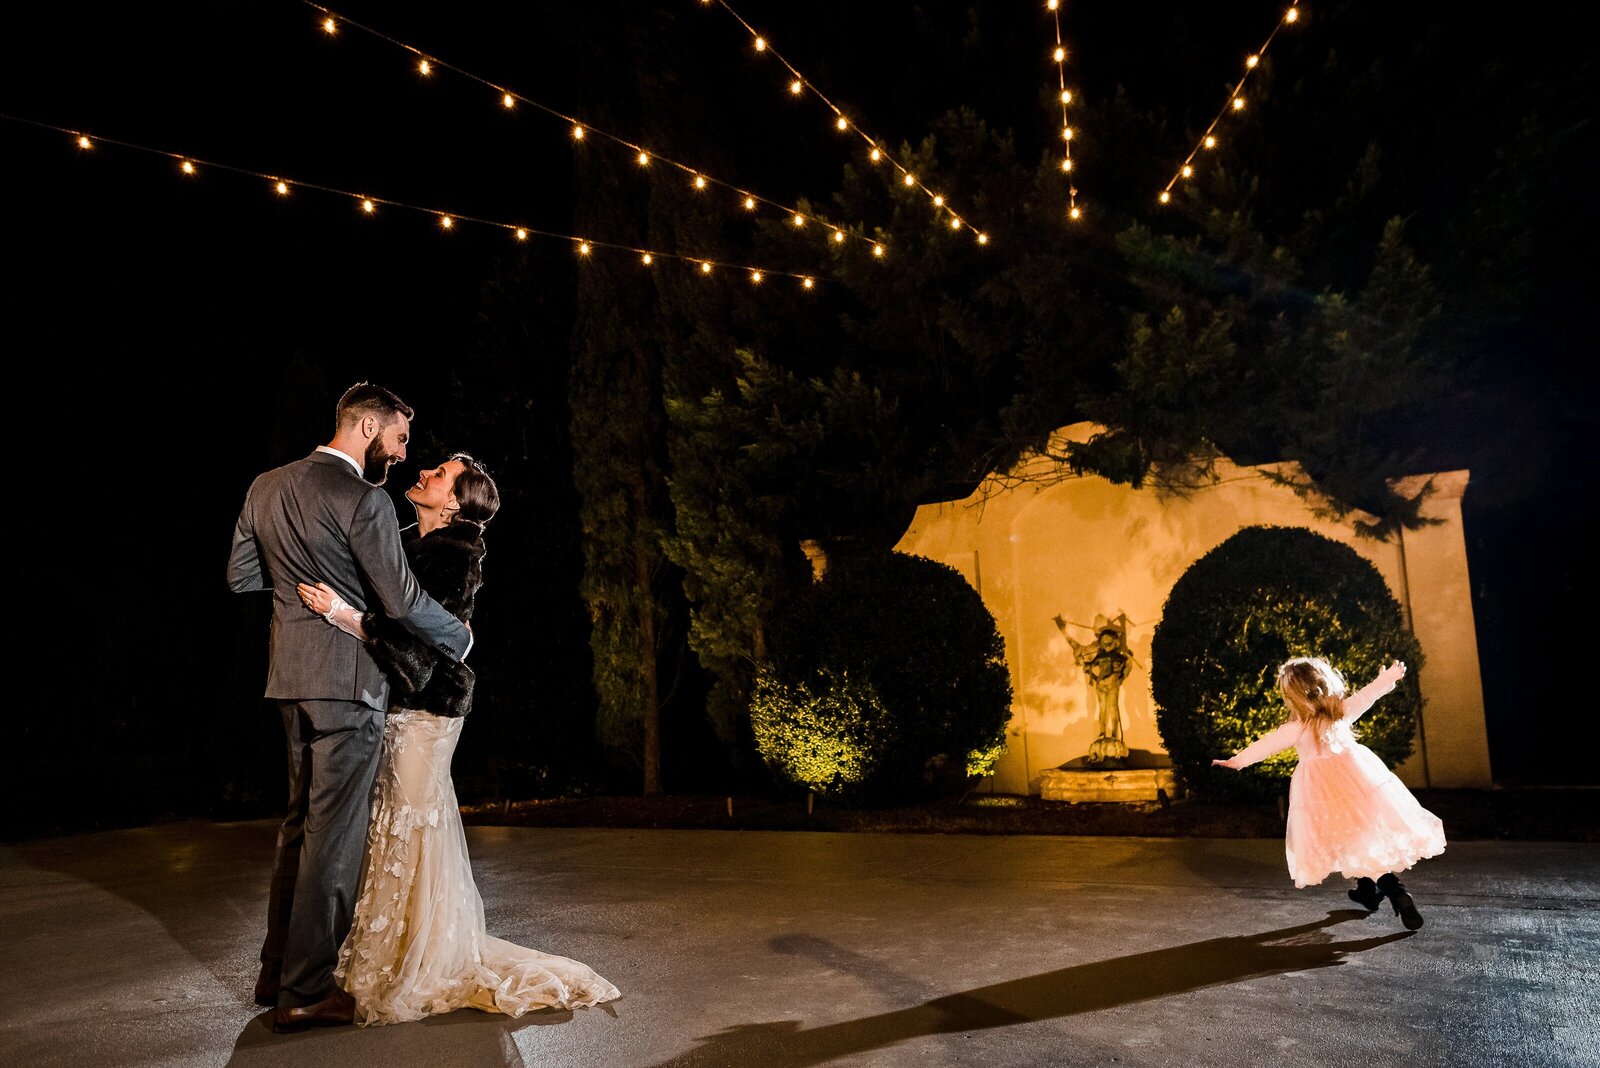 flower girl runs onto the dance floor while the bride and groom share their first dance on an outdoor patio under string lights